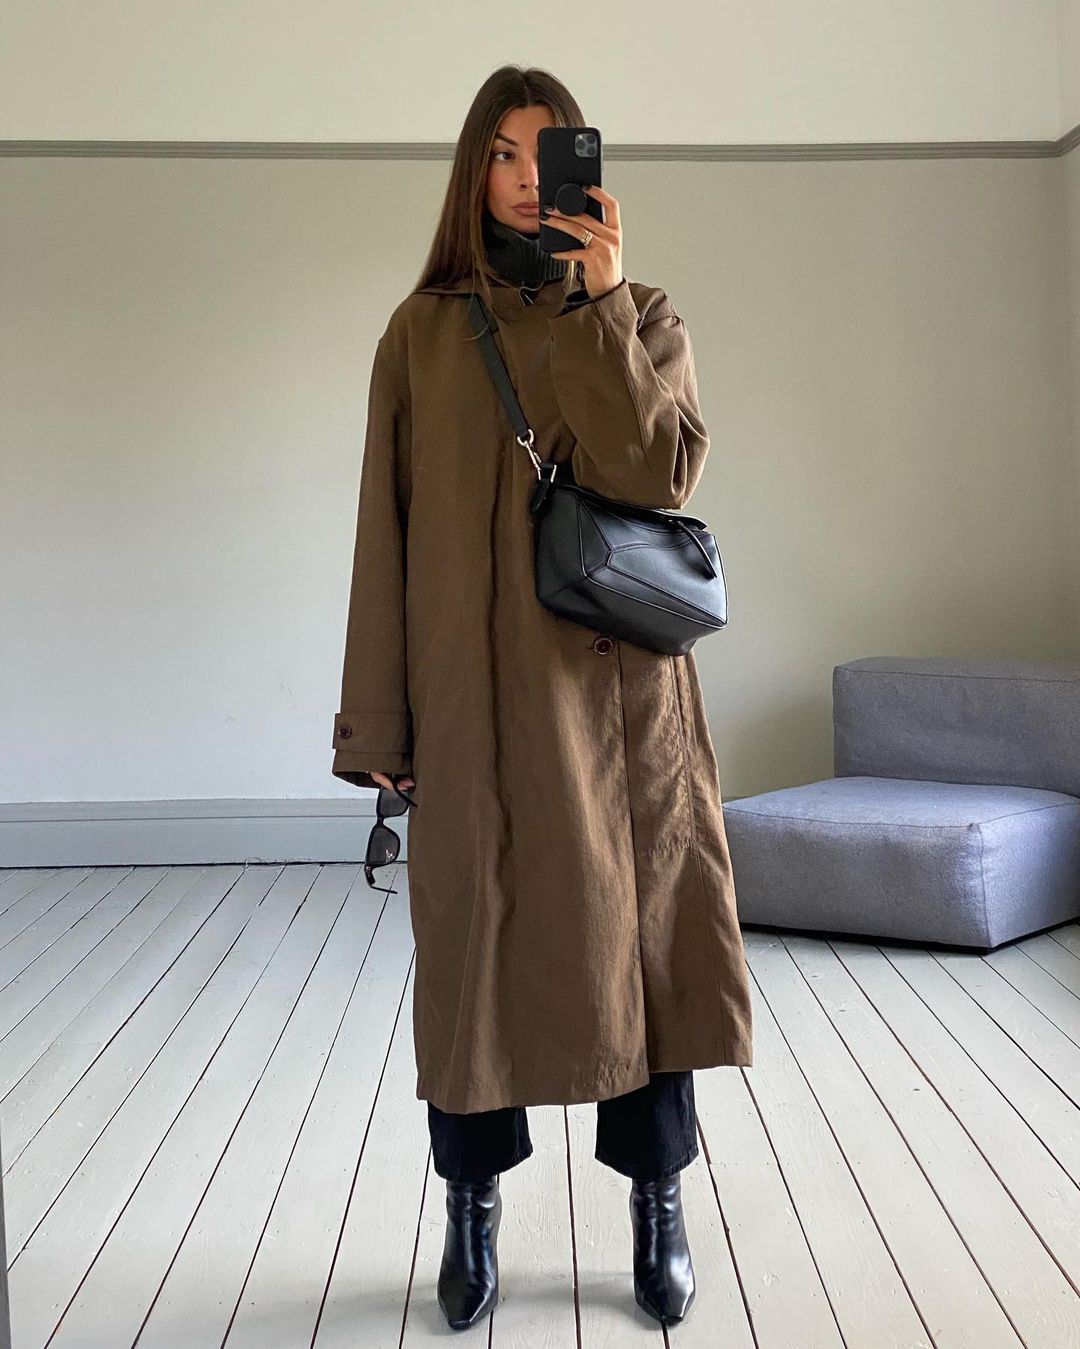 @smythsisters wears a nylon-canvas maxi coat with boots and a crossbody bag